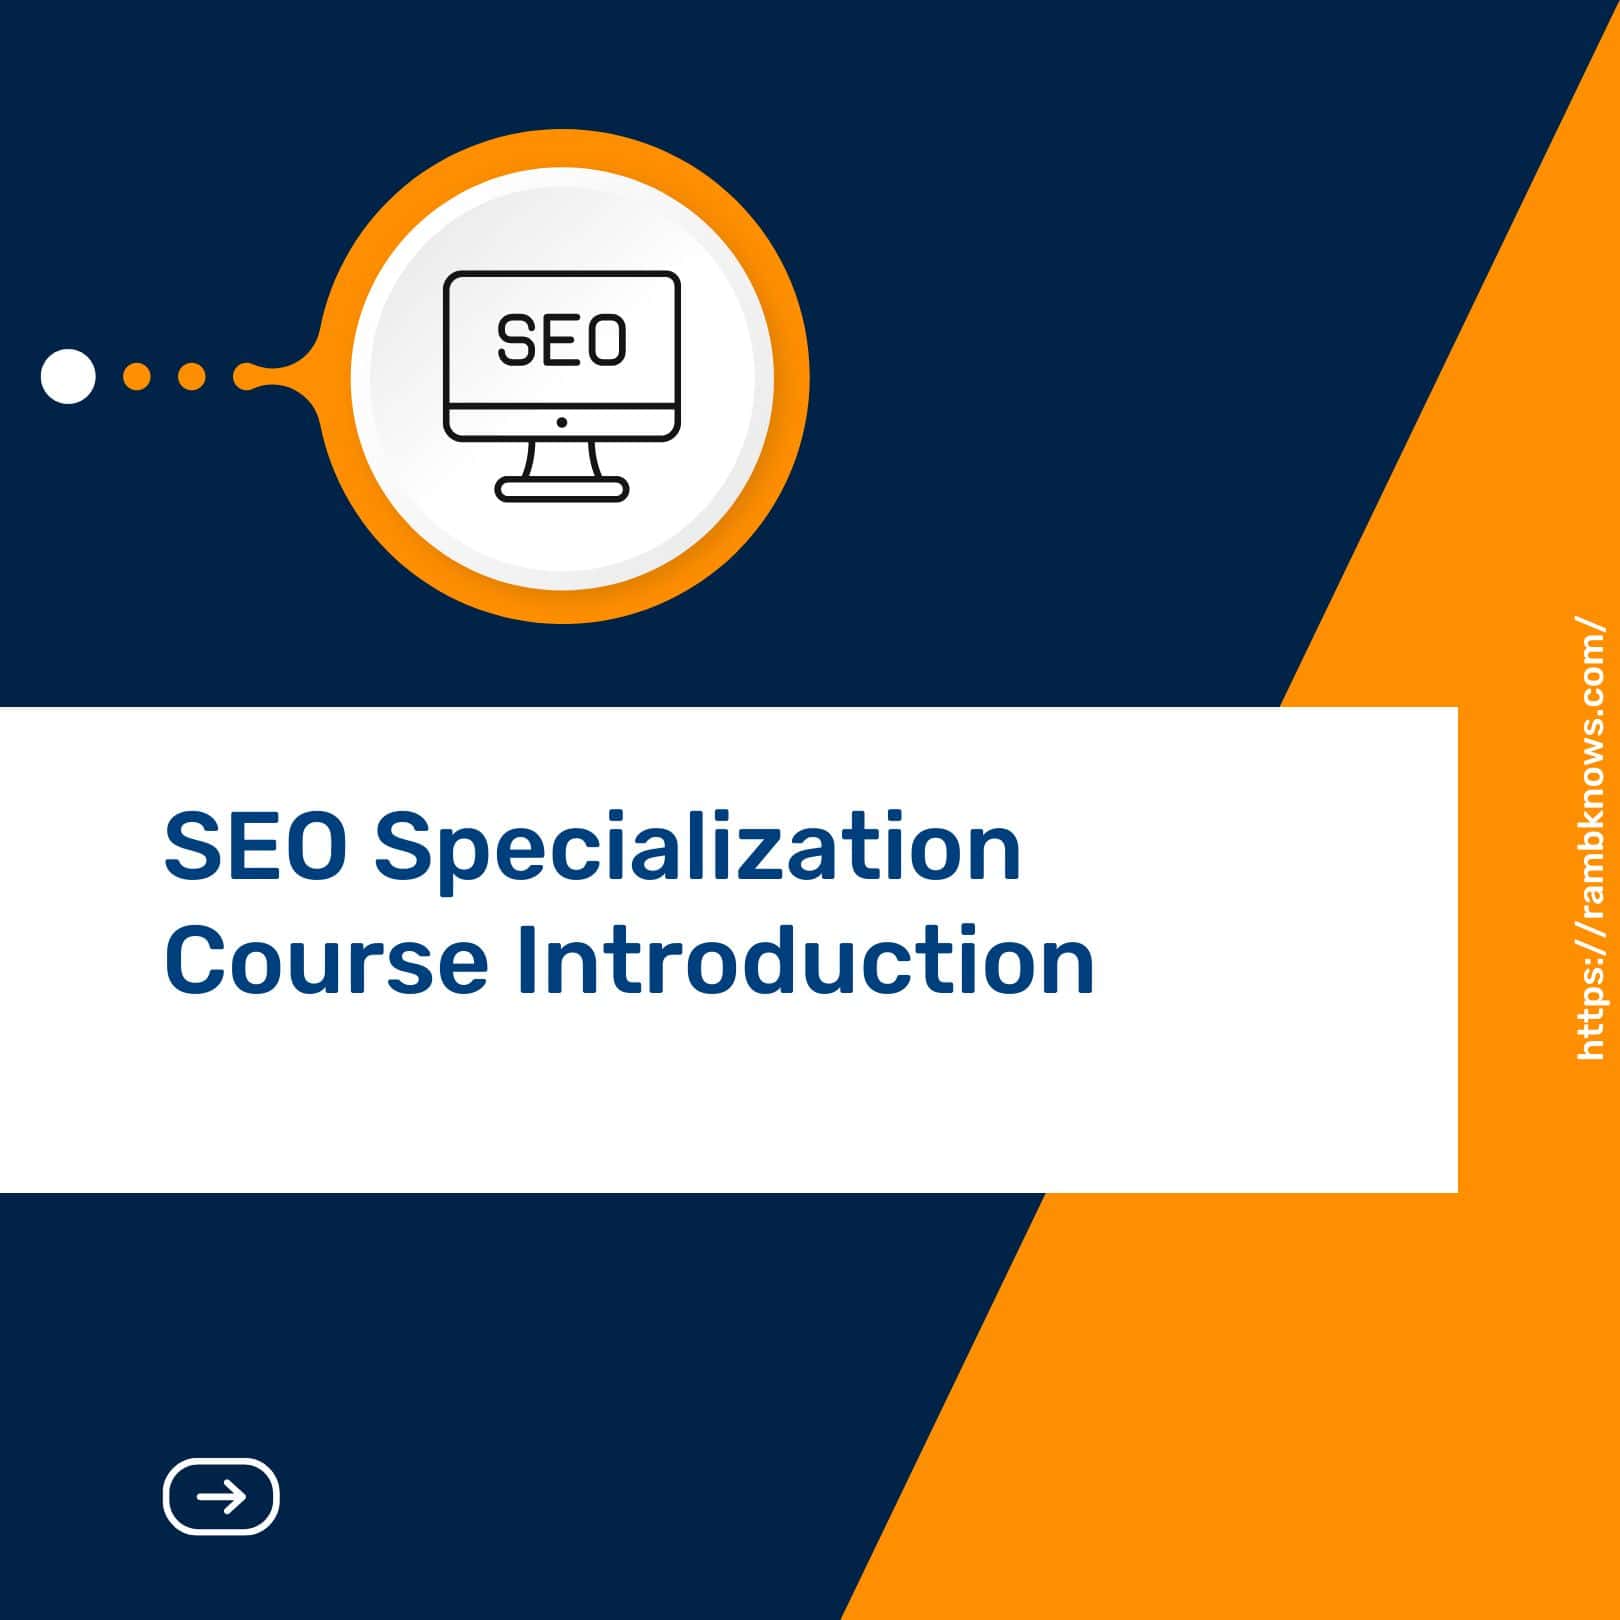 seo specialization course introduction